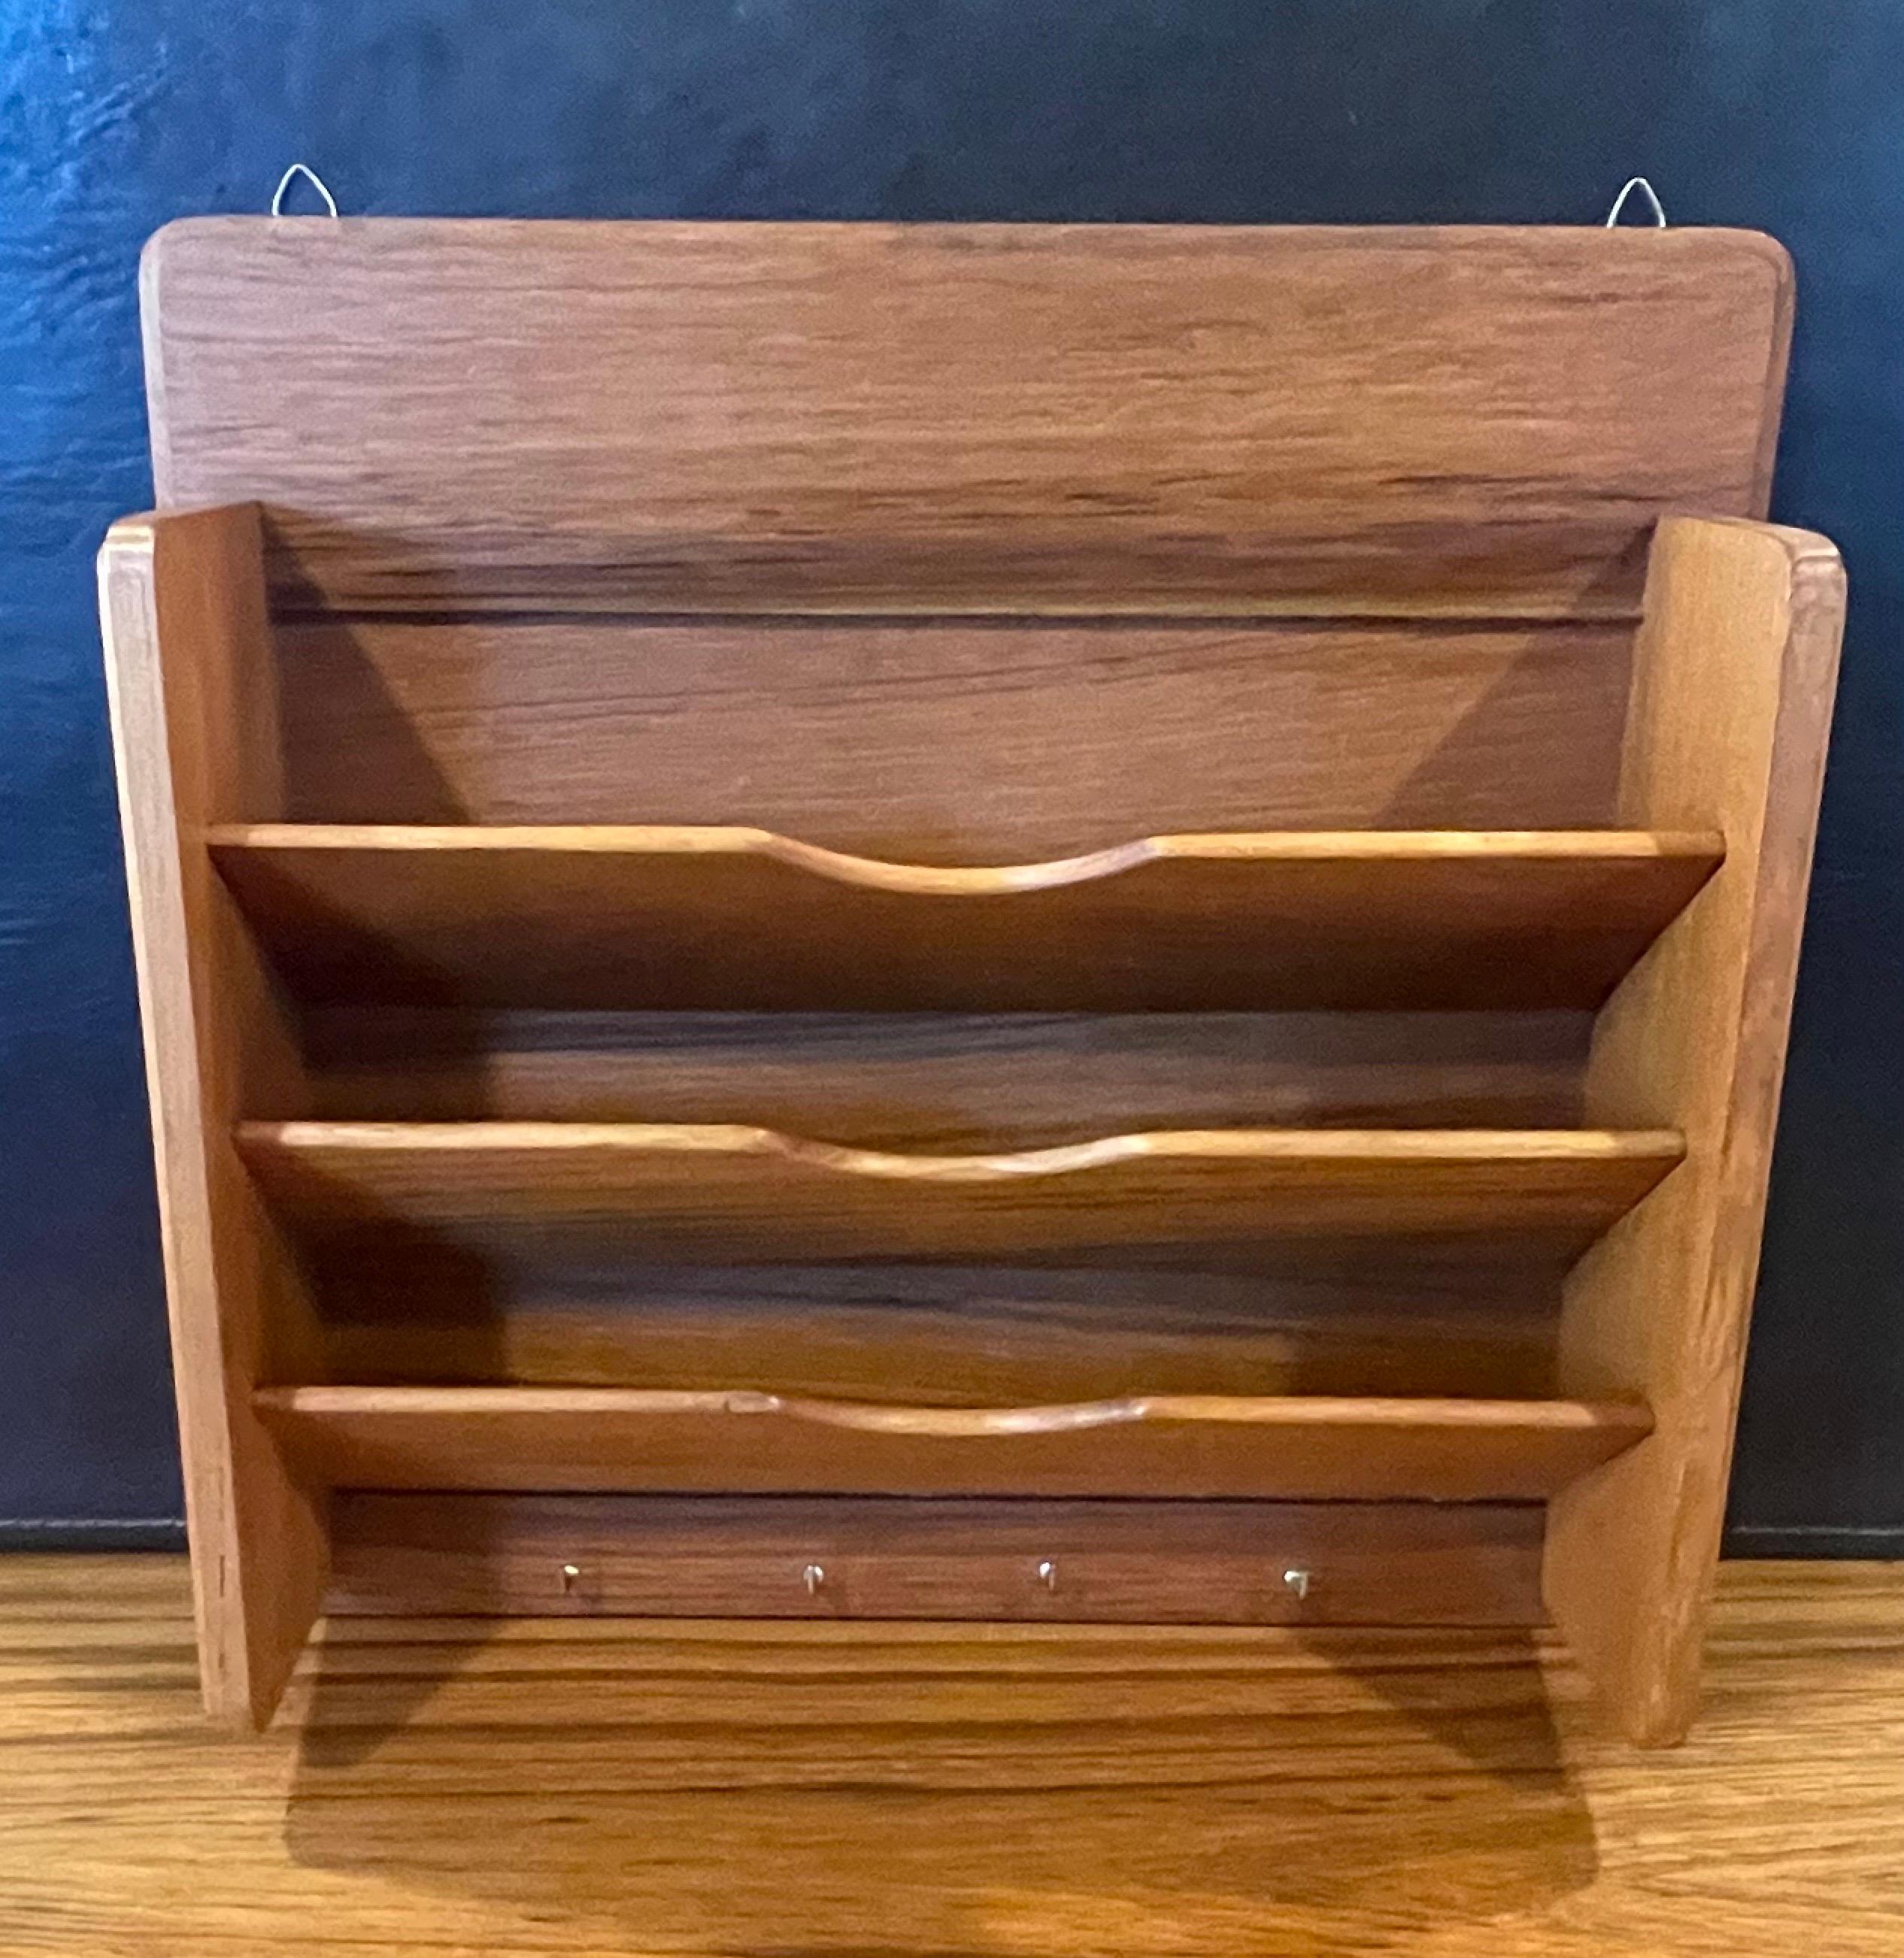 A small MCM teak wall shelf / organizer with three shelves and four brass hooks, circa 1970s. The piece is in very good vintage condition and measures 12.375